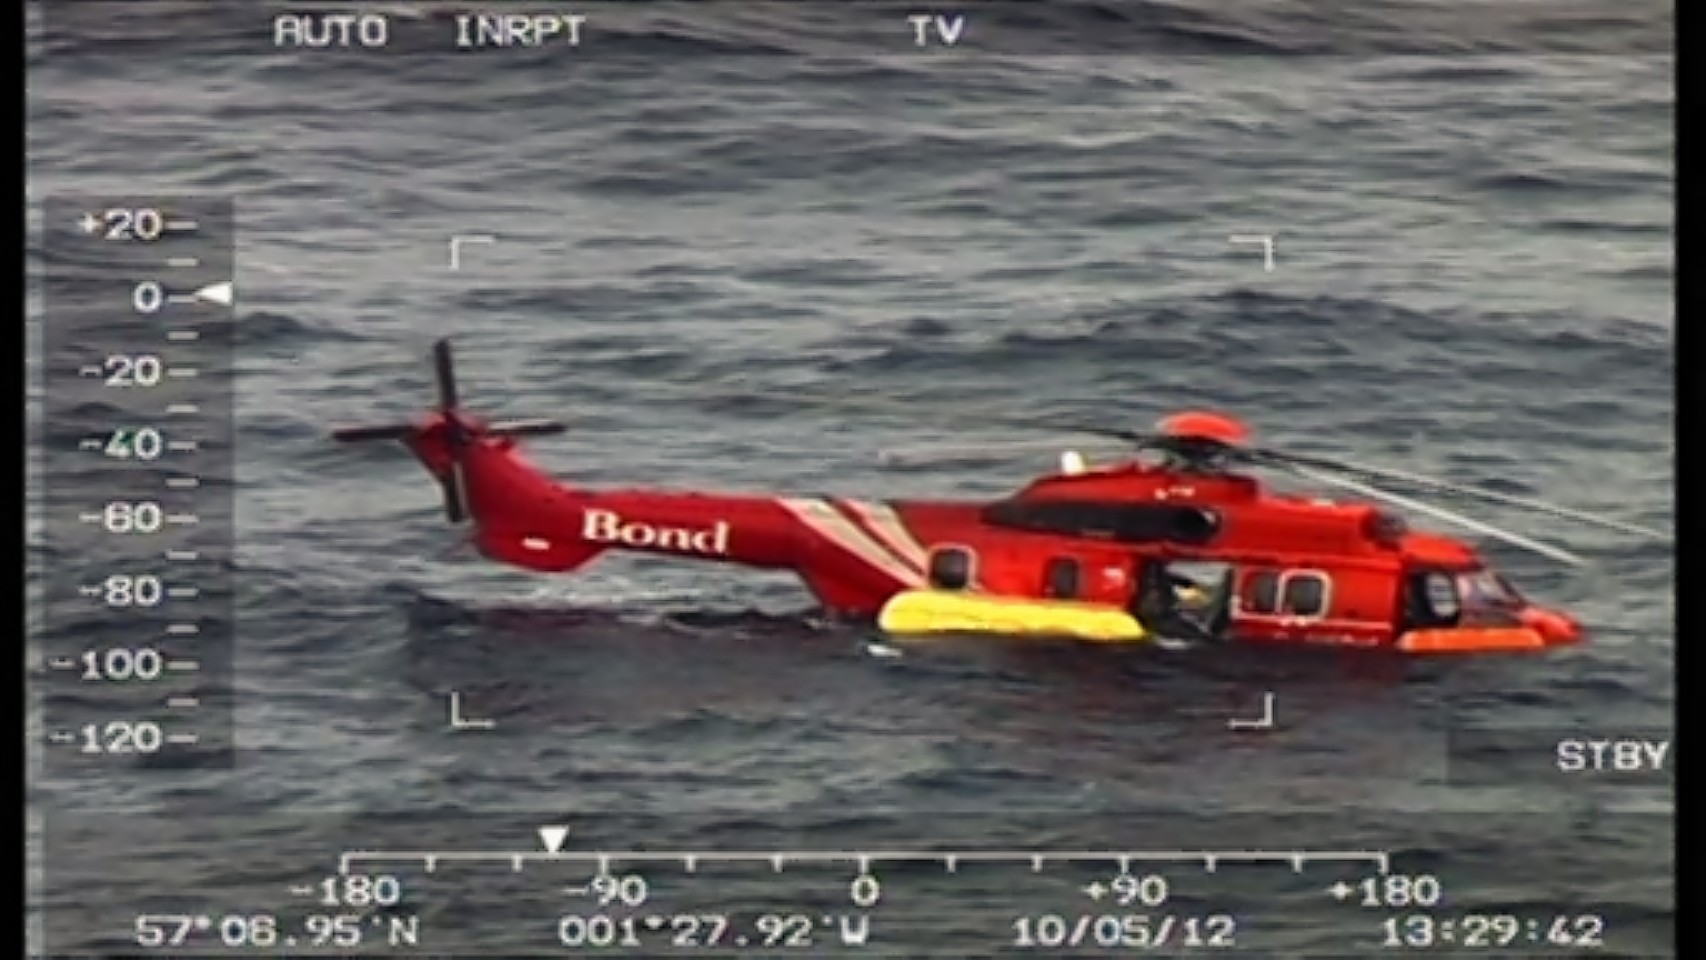 The downed Bond EC 225 Super Puma helicopter in the North Sea around 30 miles off the coast of Aberdeen